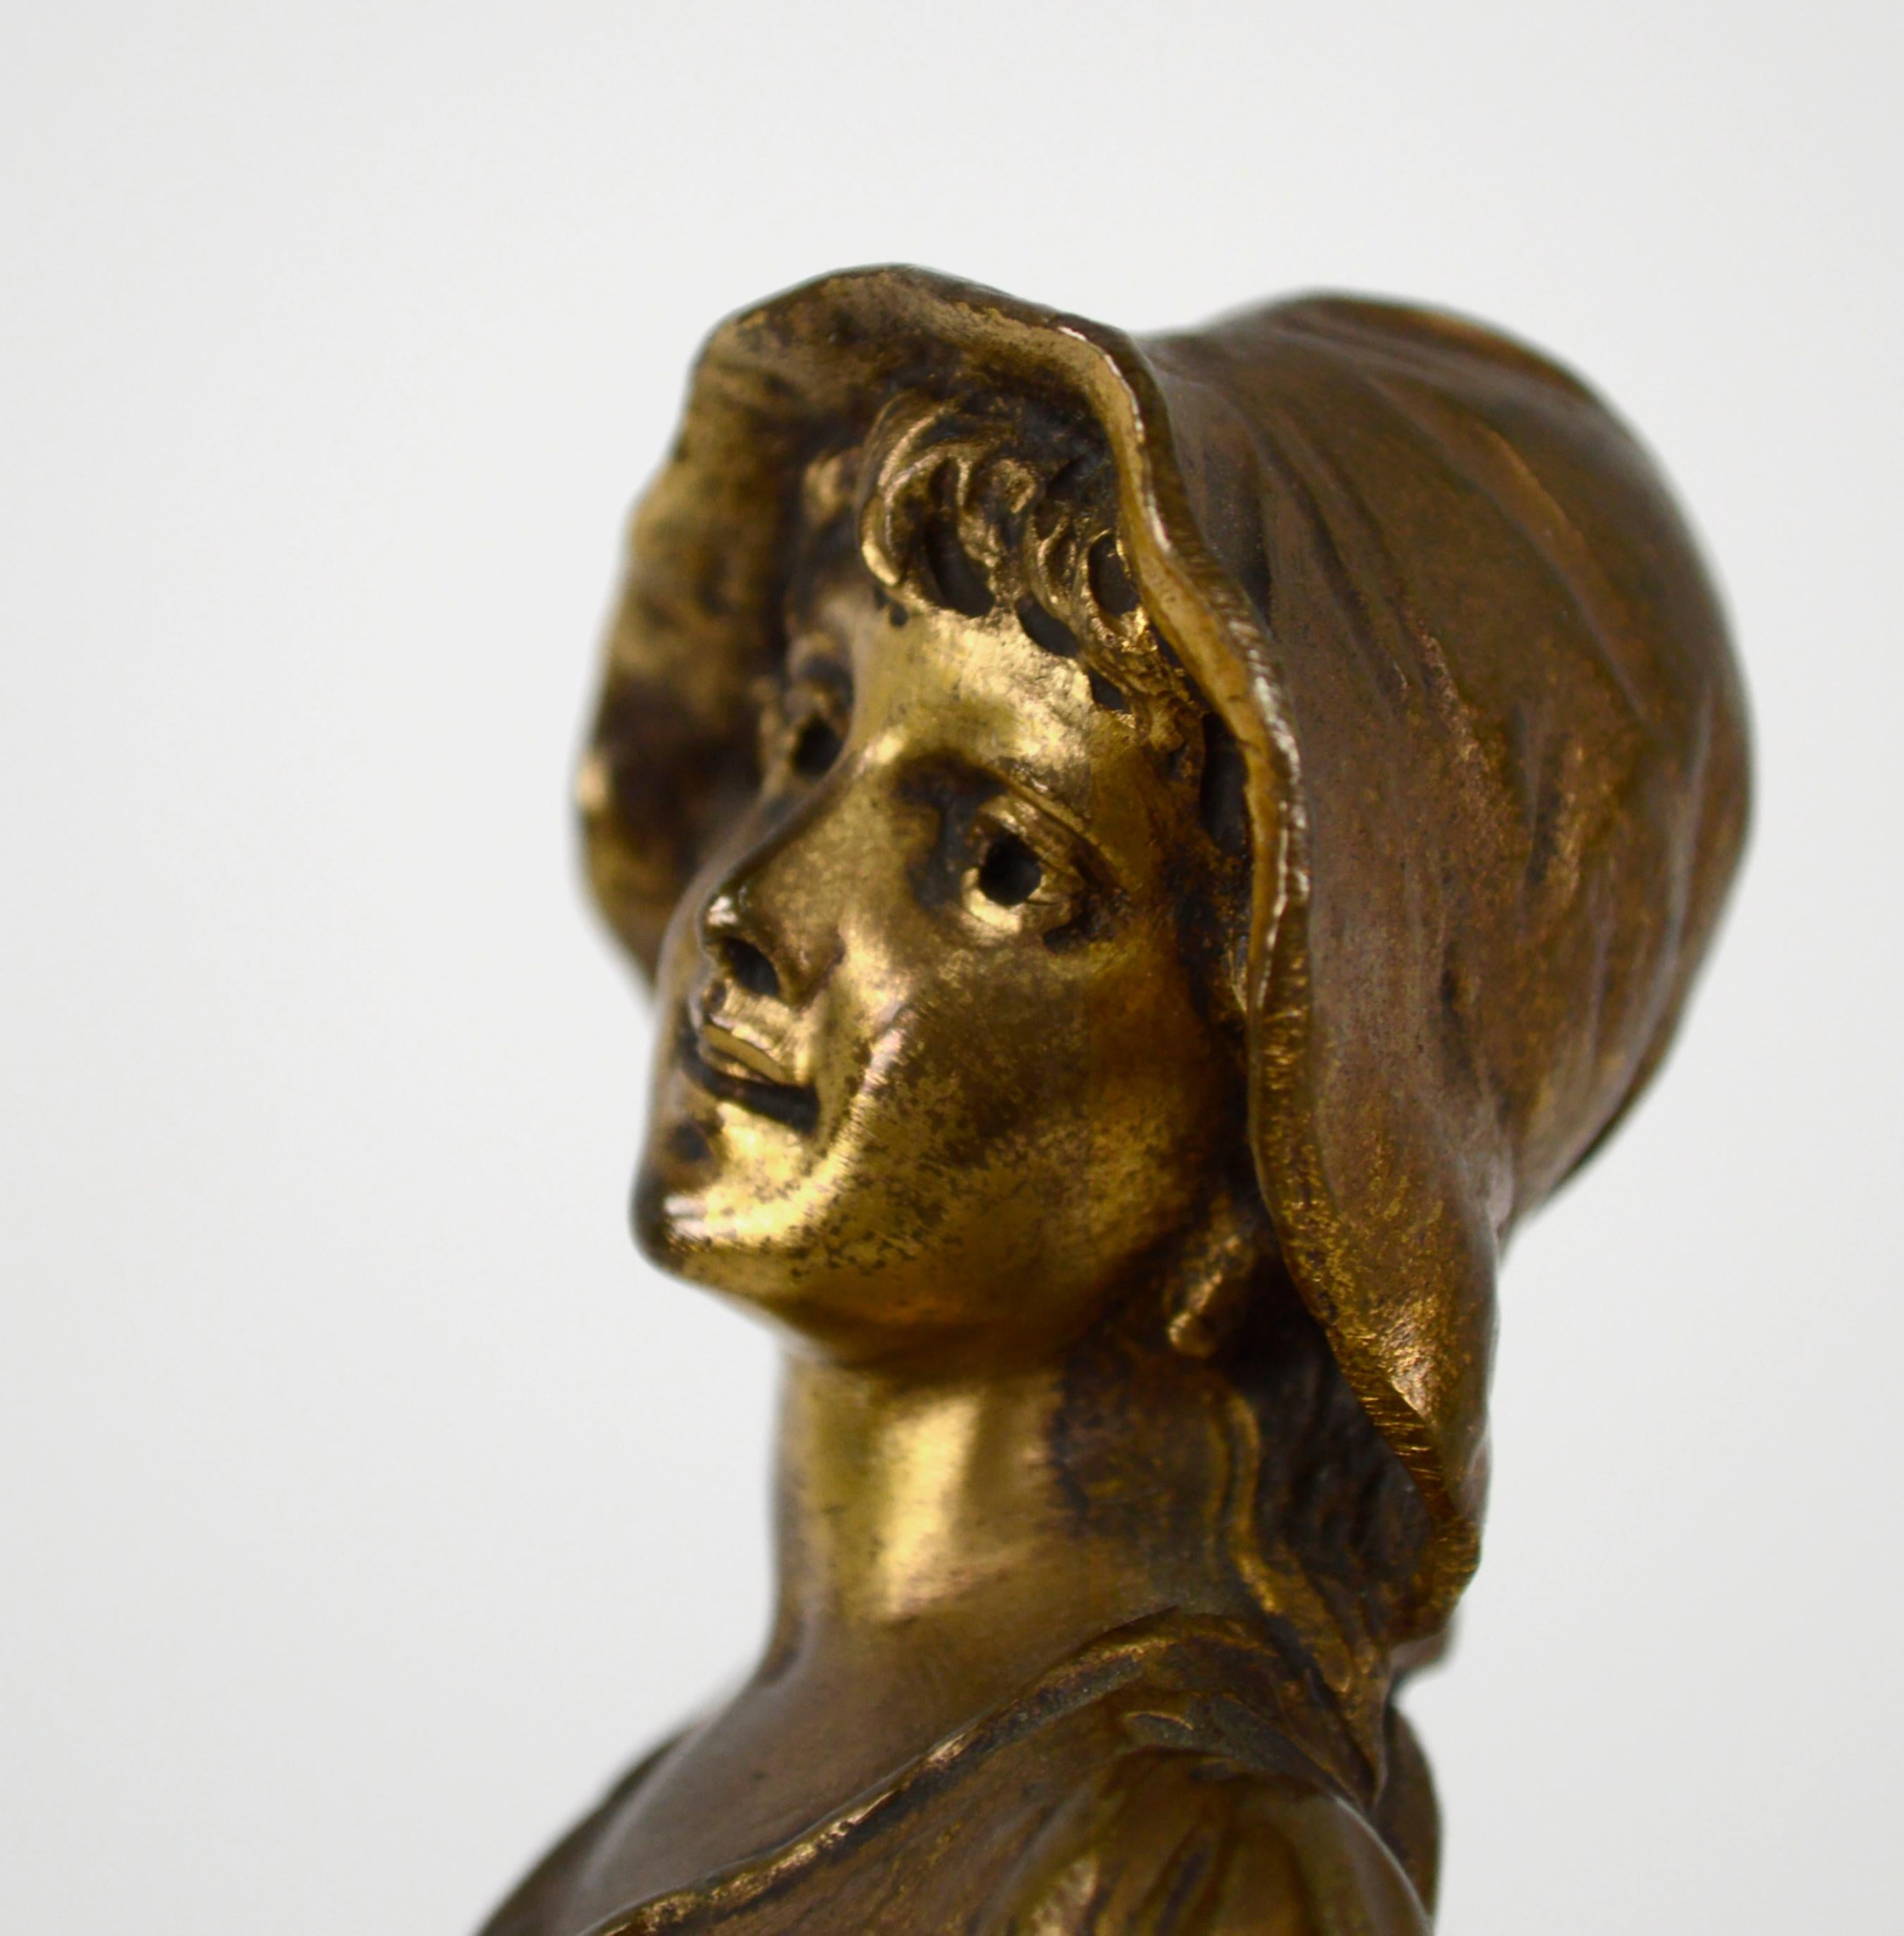 Early 20th Century Bronze Figure Sculpture, Shepherd Girl with Staff Statue - Gold Figurative Sculpture by R. Hobold